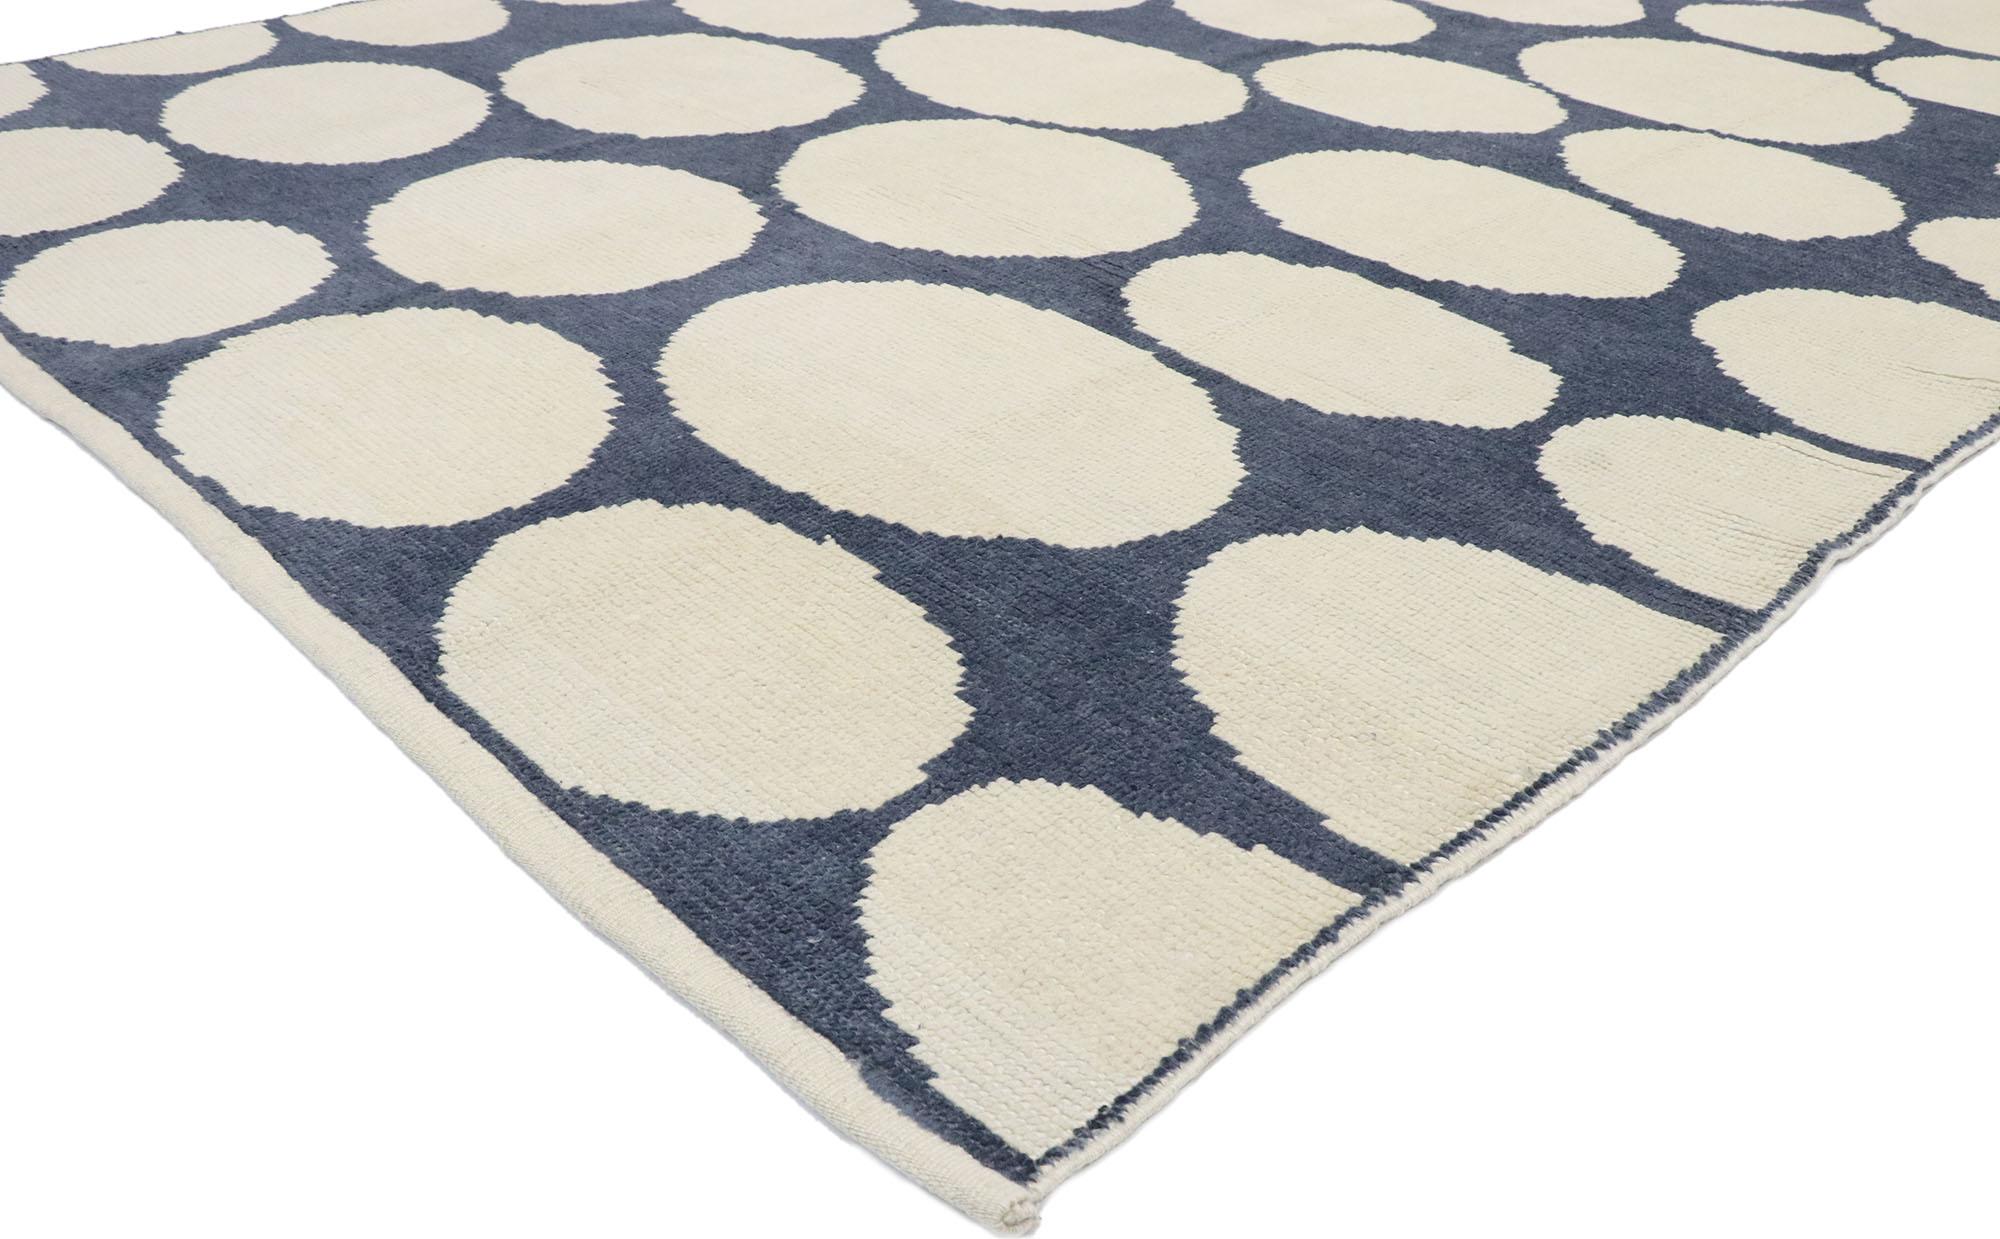 53441 New Contemporary Moroccan Polka Dot Orphism style rug inspired by Yayoi Kusama. Drawing inspiration from Yayoi Kusama and Sonia Delaunay, this hand knotted wool contemporary Moroccan style area rug beautifully embodies Orphism design. The